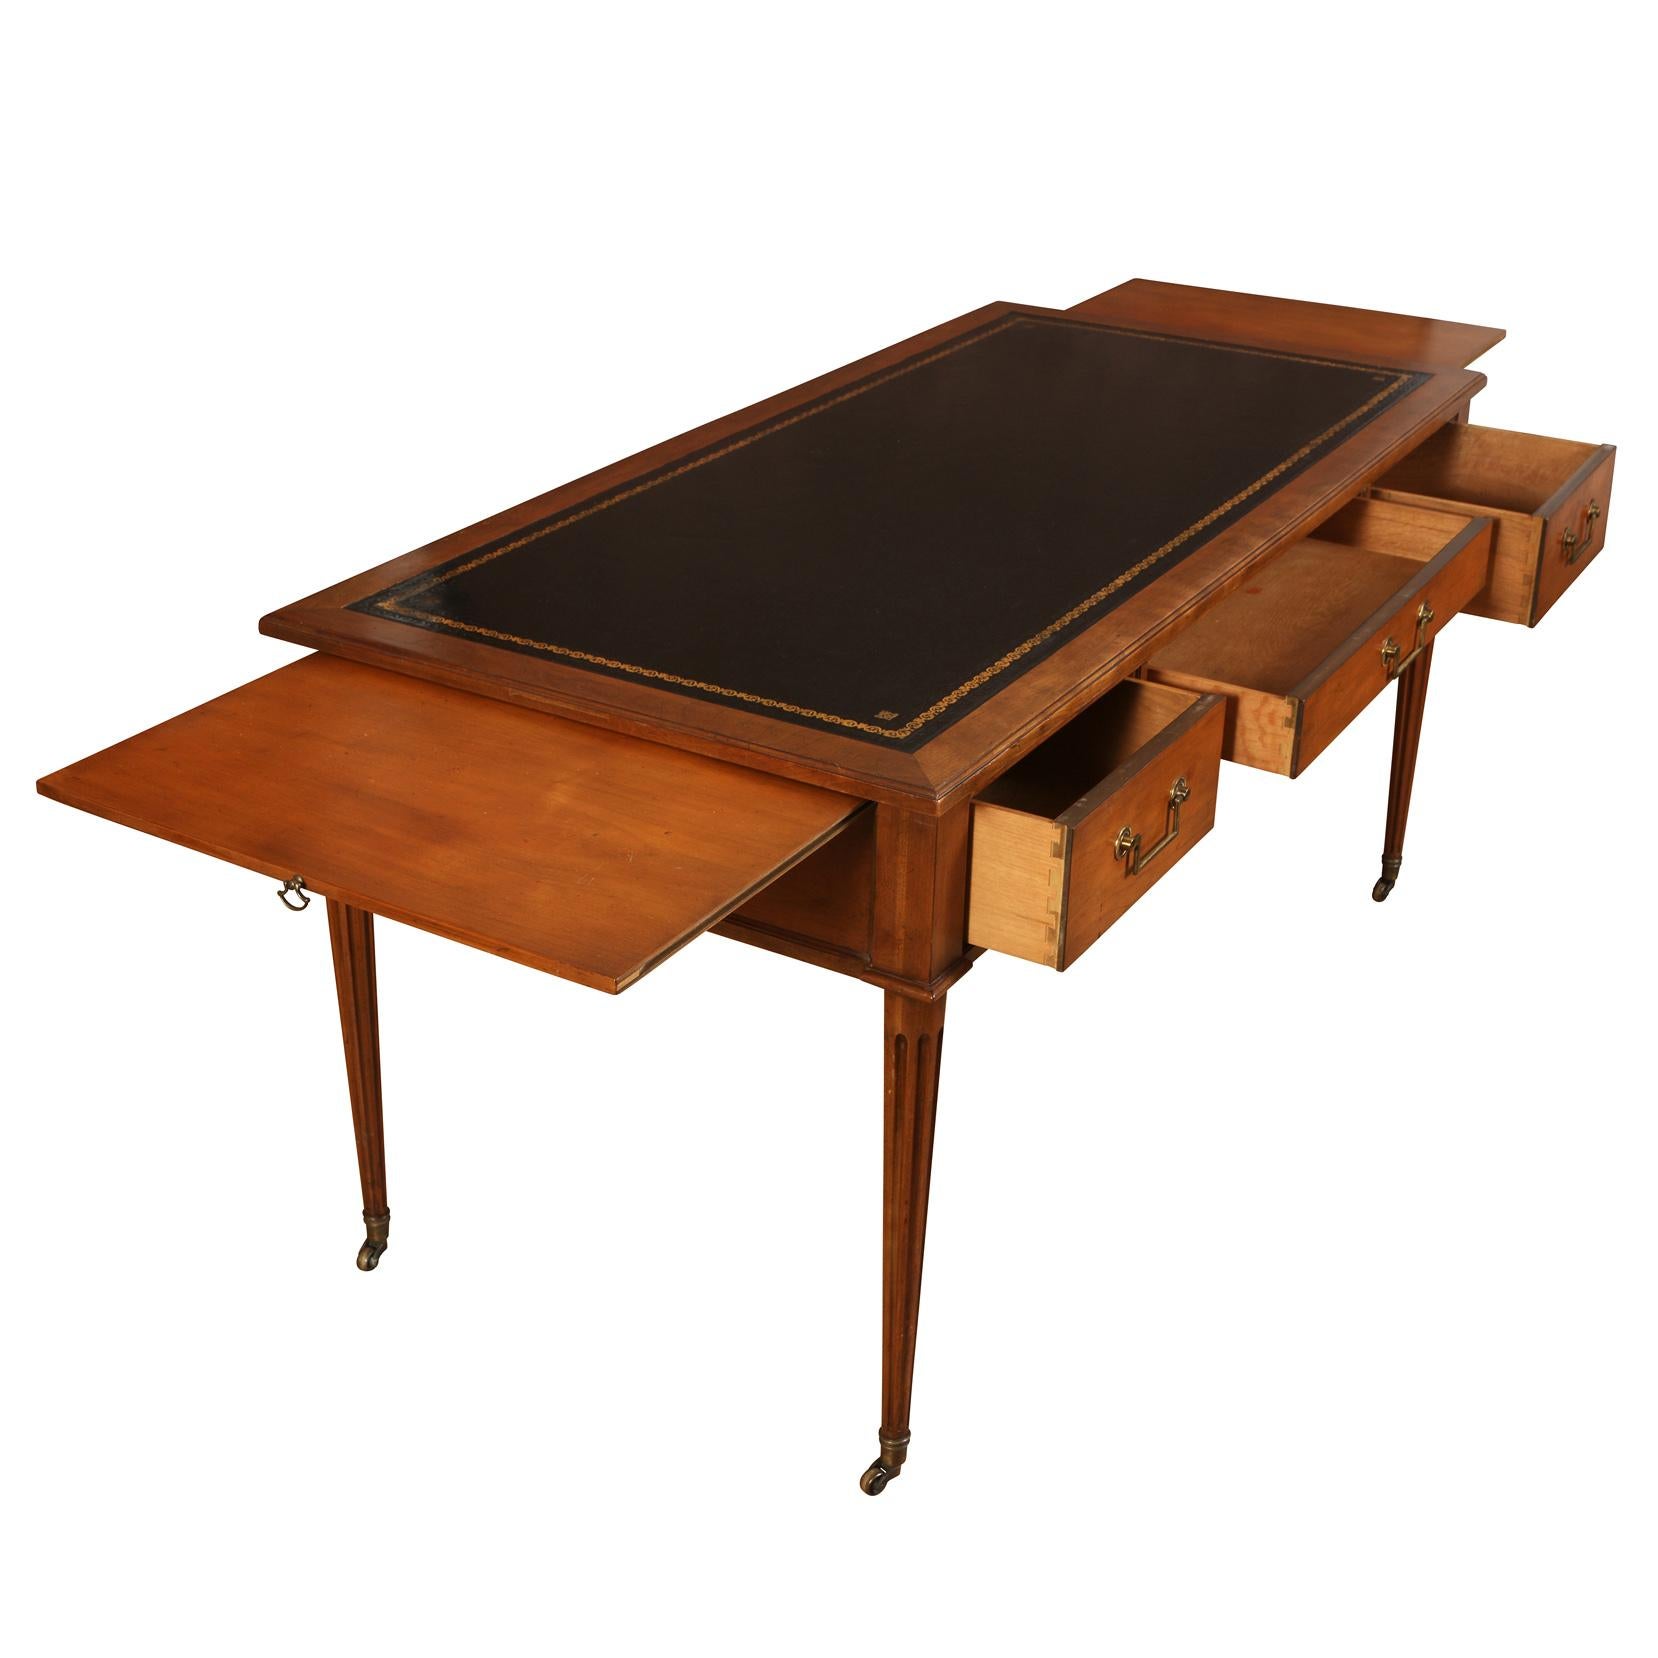 20th Century A Louis XVI Style Mahogany Desk with Leather Top